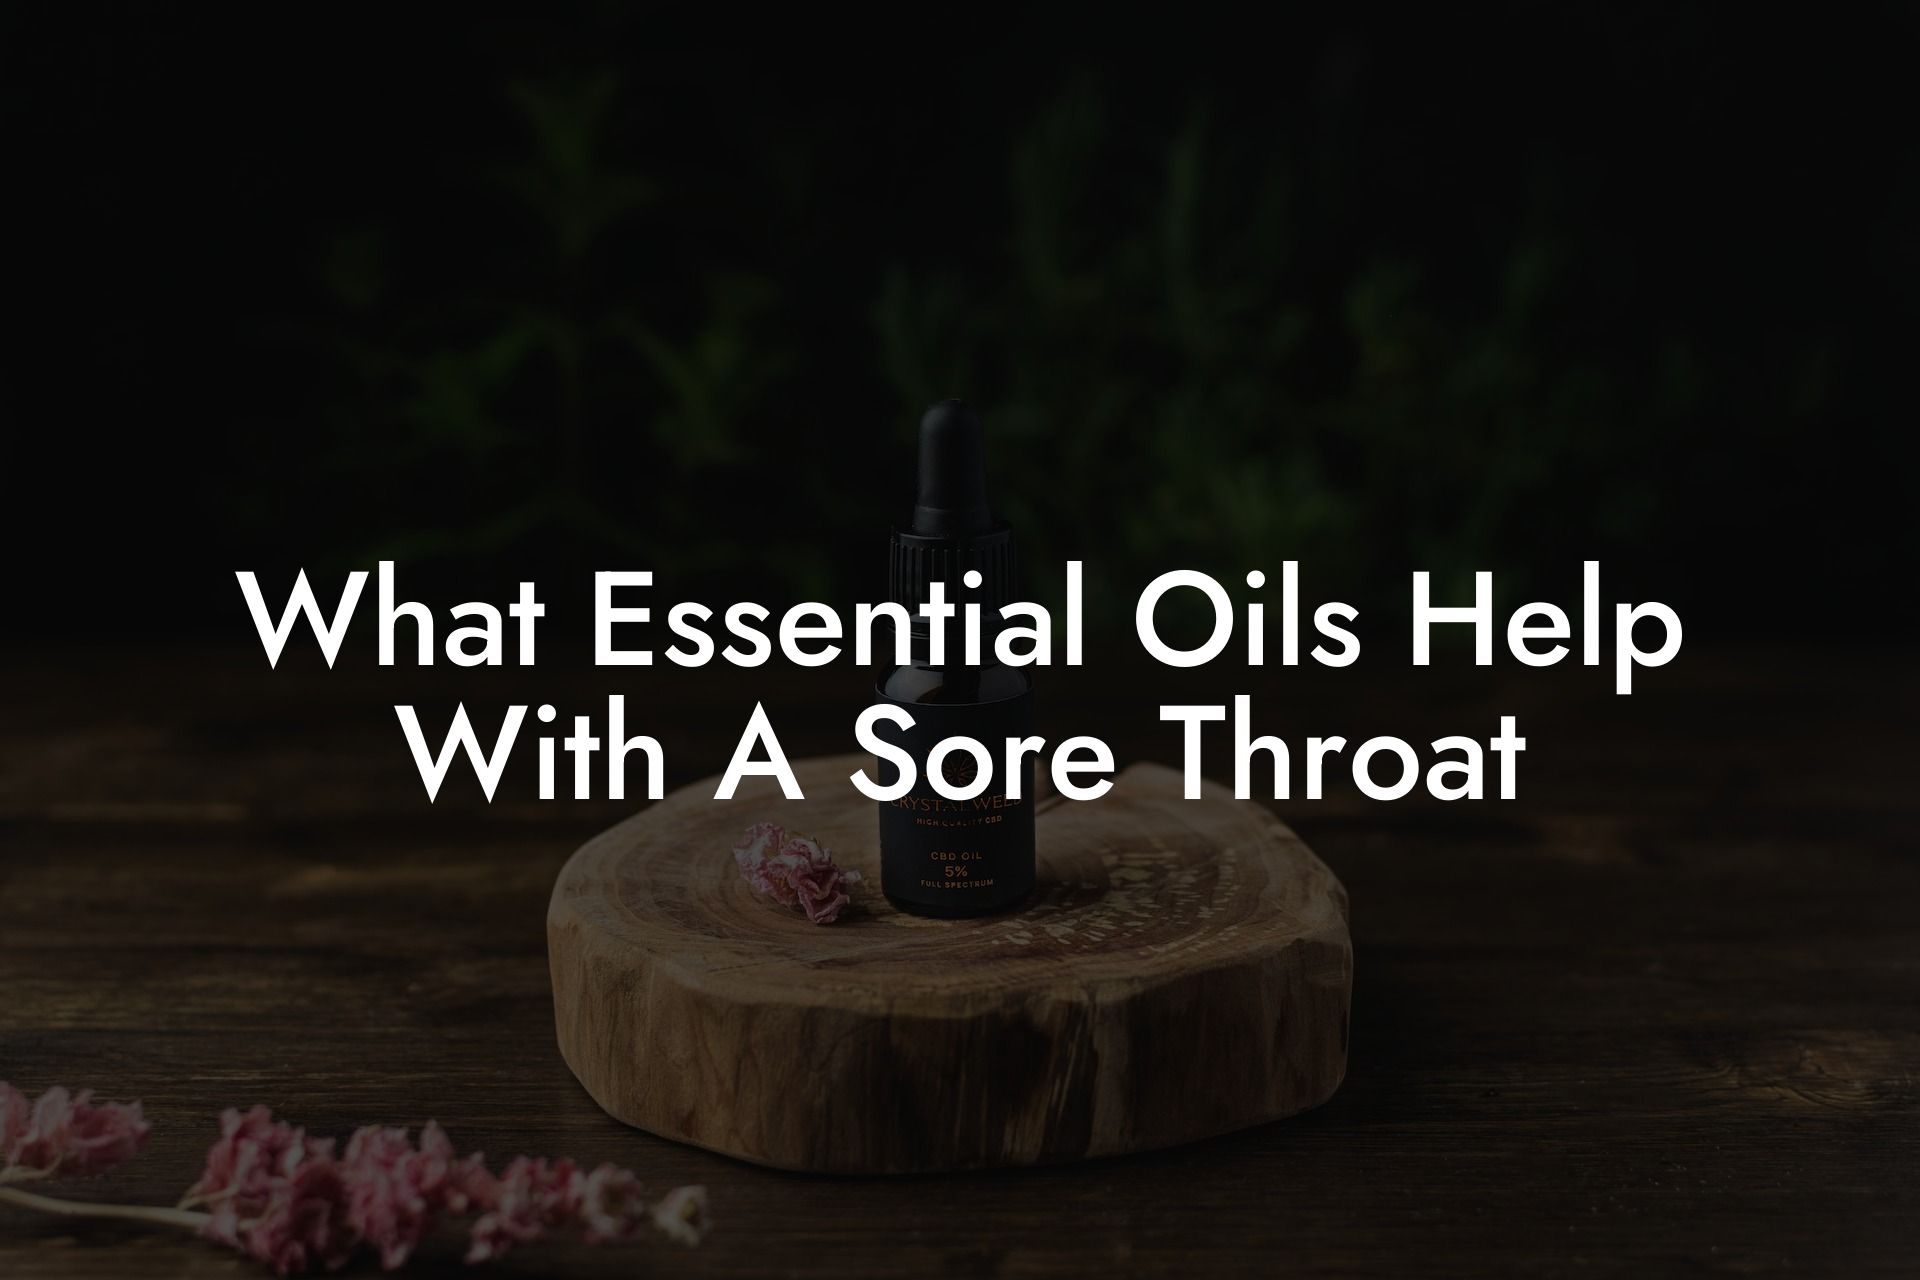 What Essential Oils Help With A Sore Throat